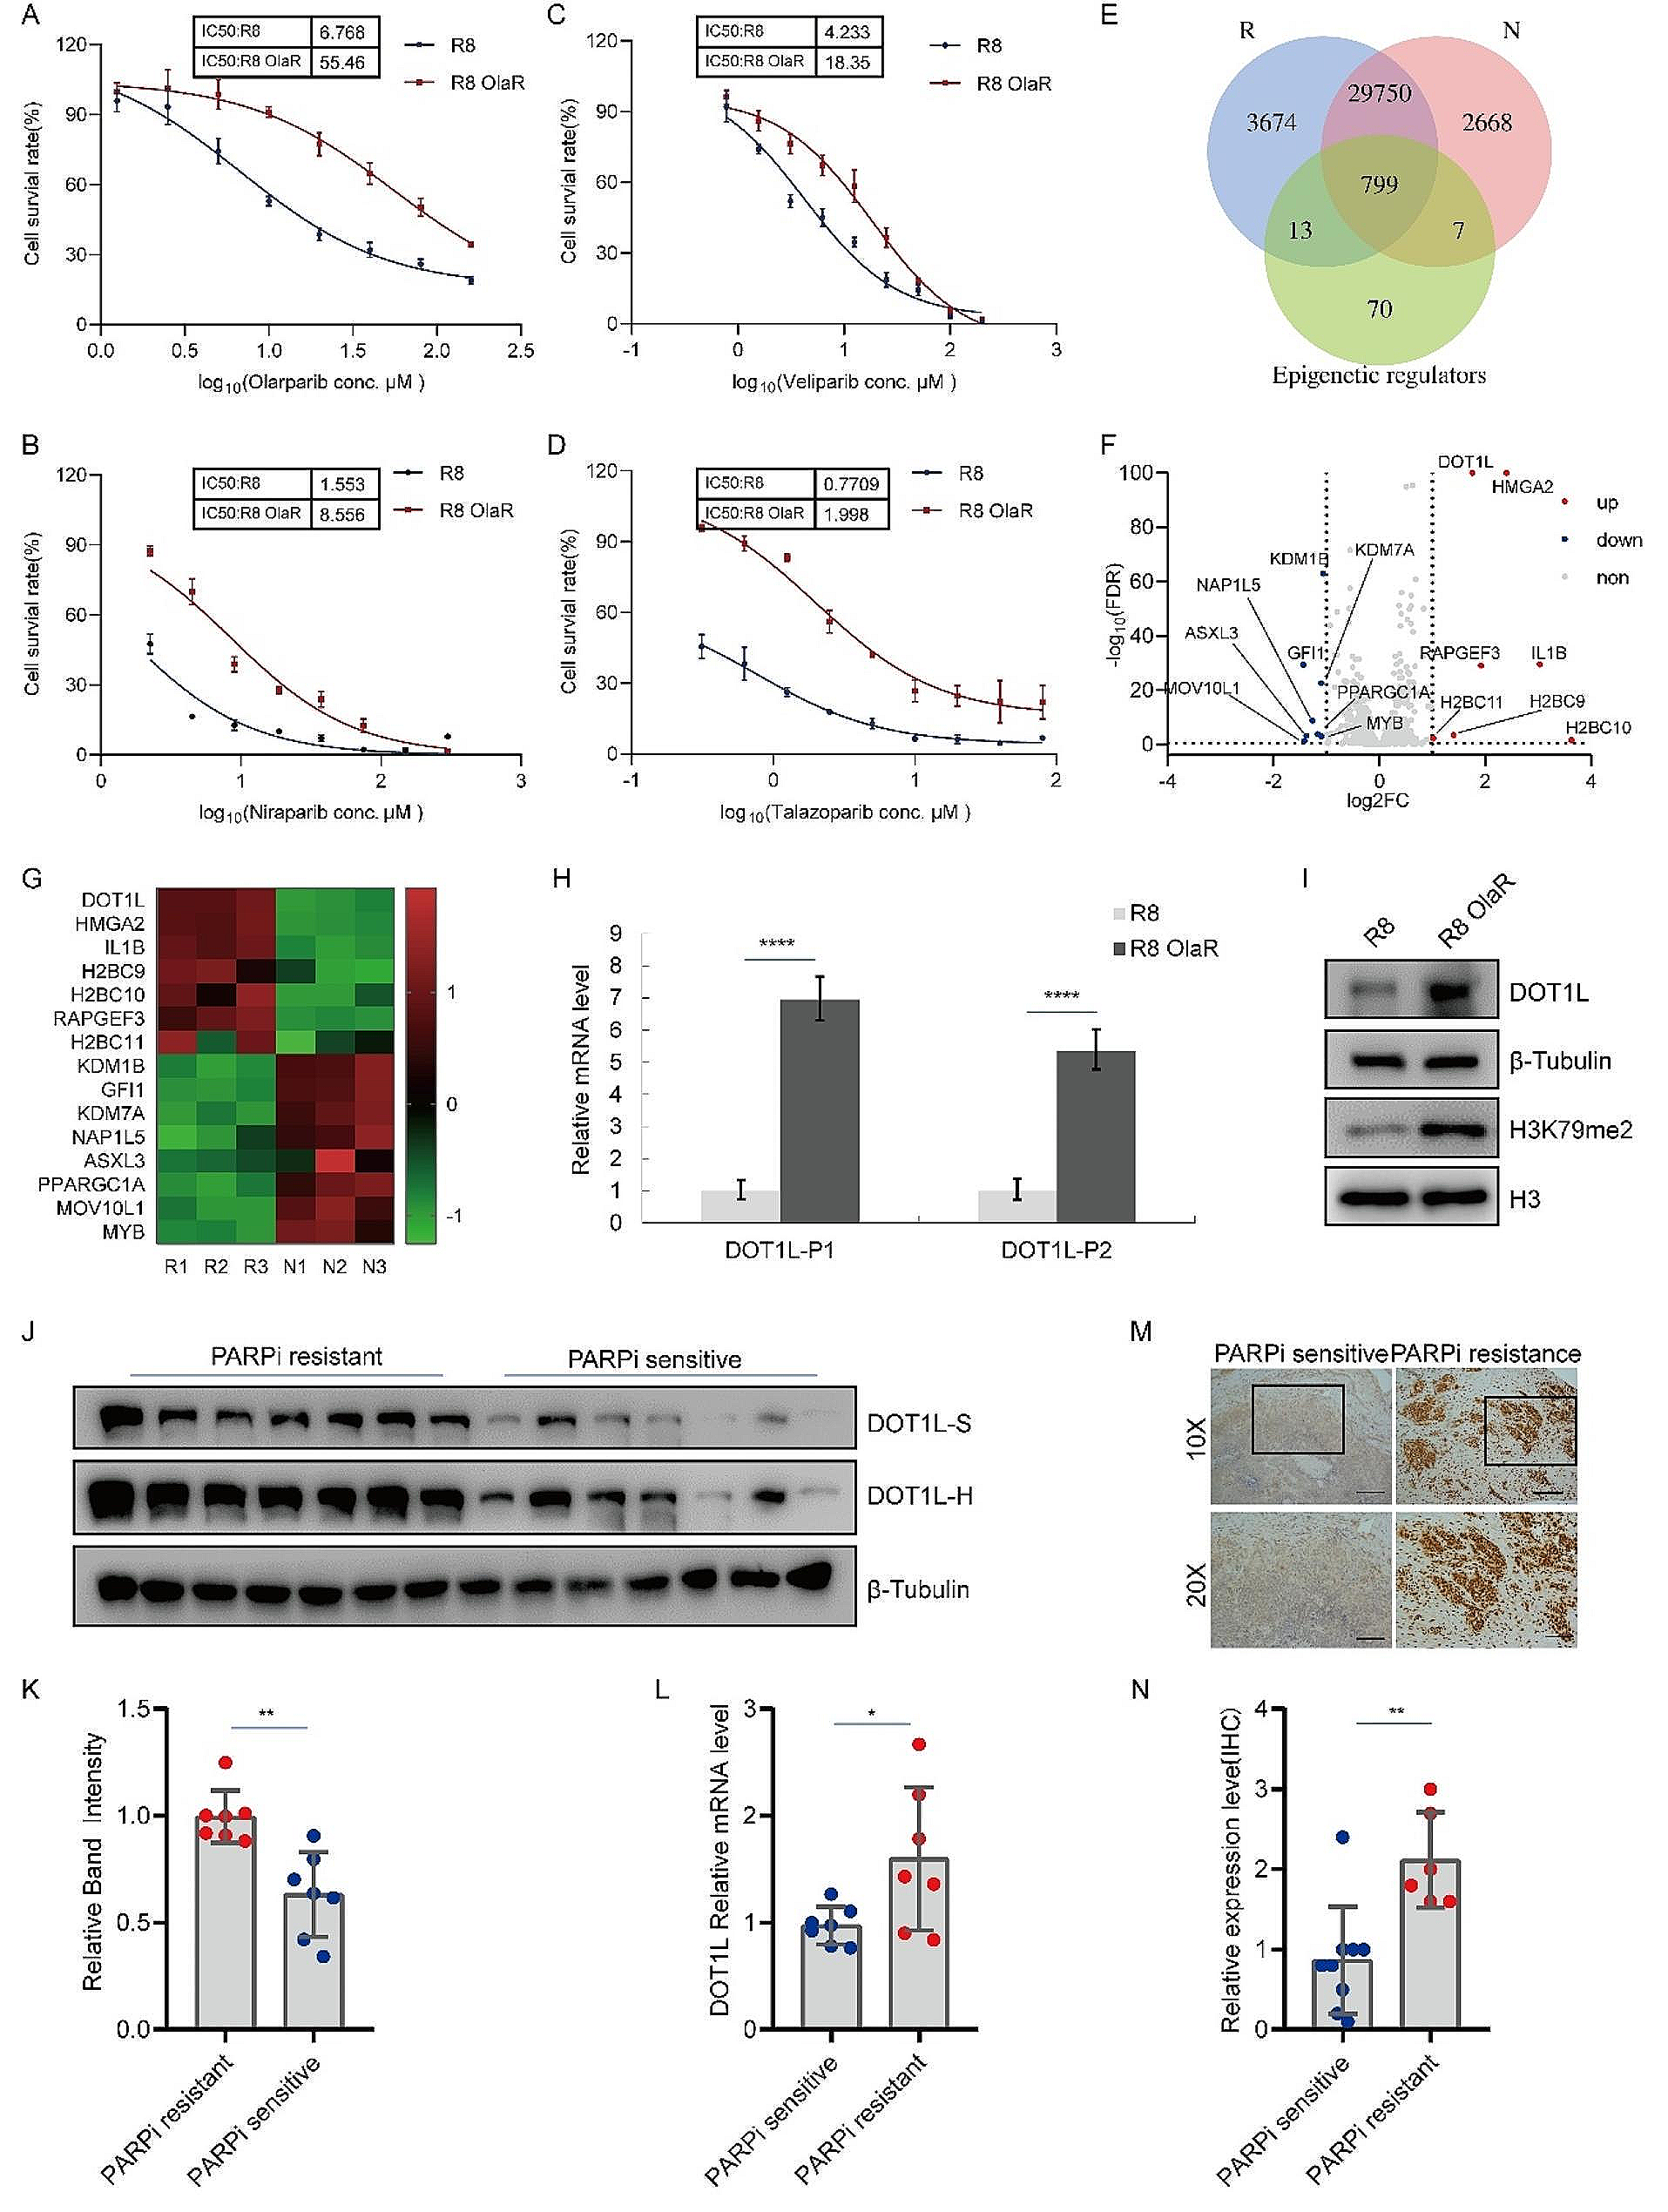 PARP1-DOT1L transcription axis drives acquired resistance to PARP inhibitor in ovarian cancer